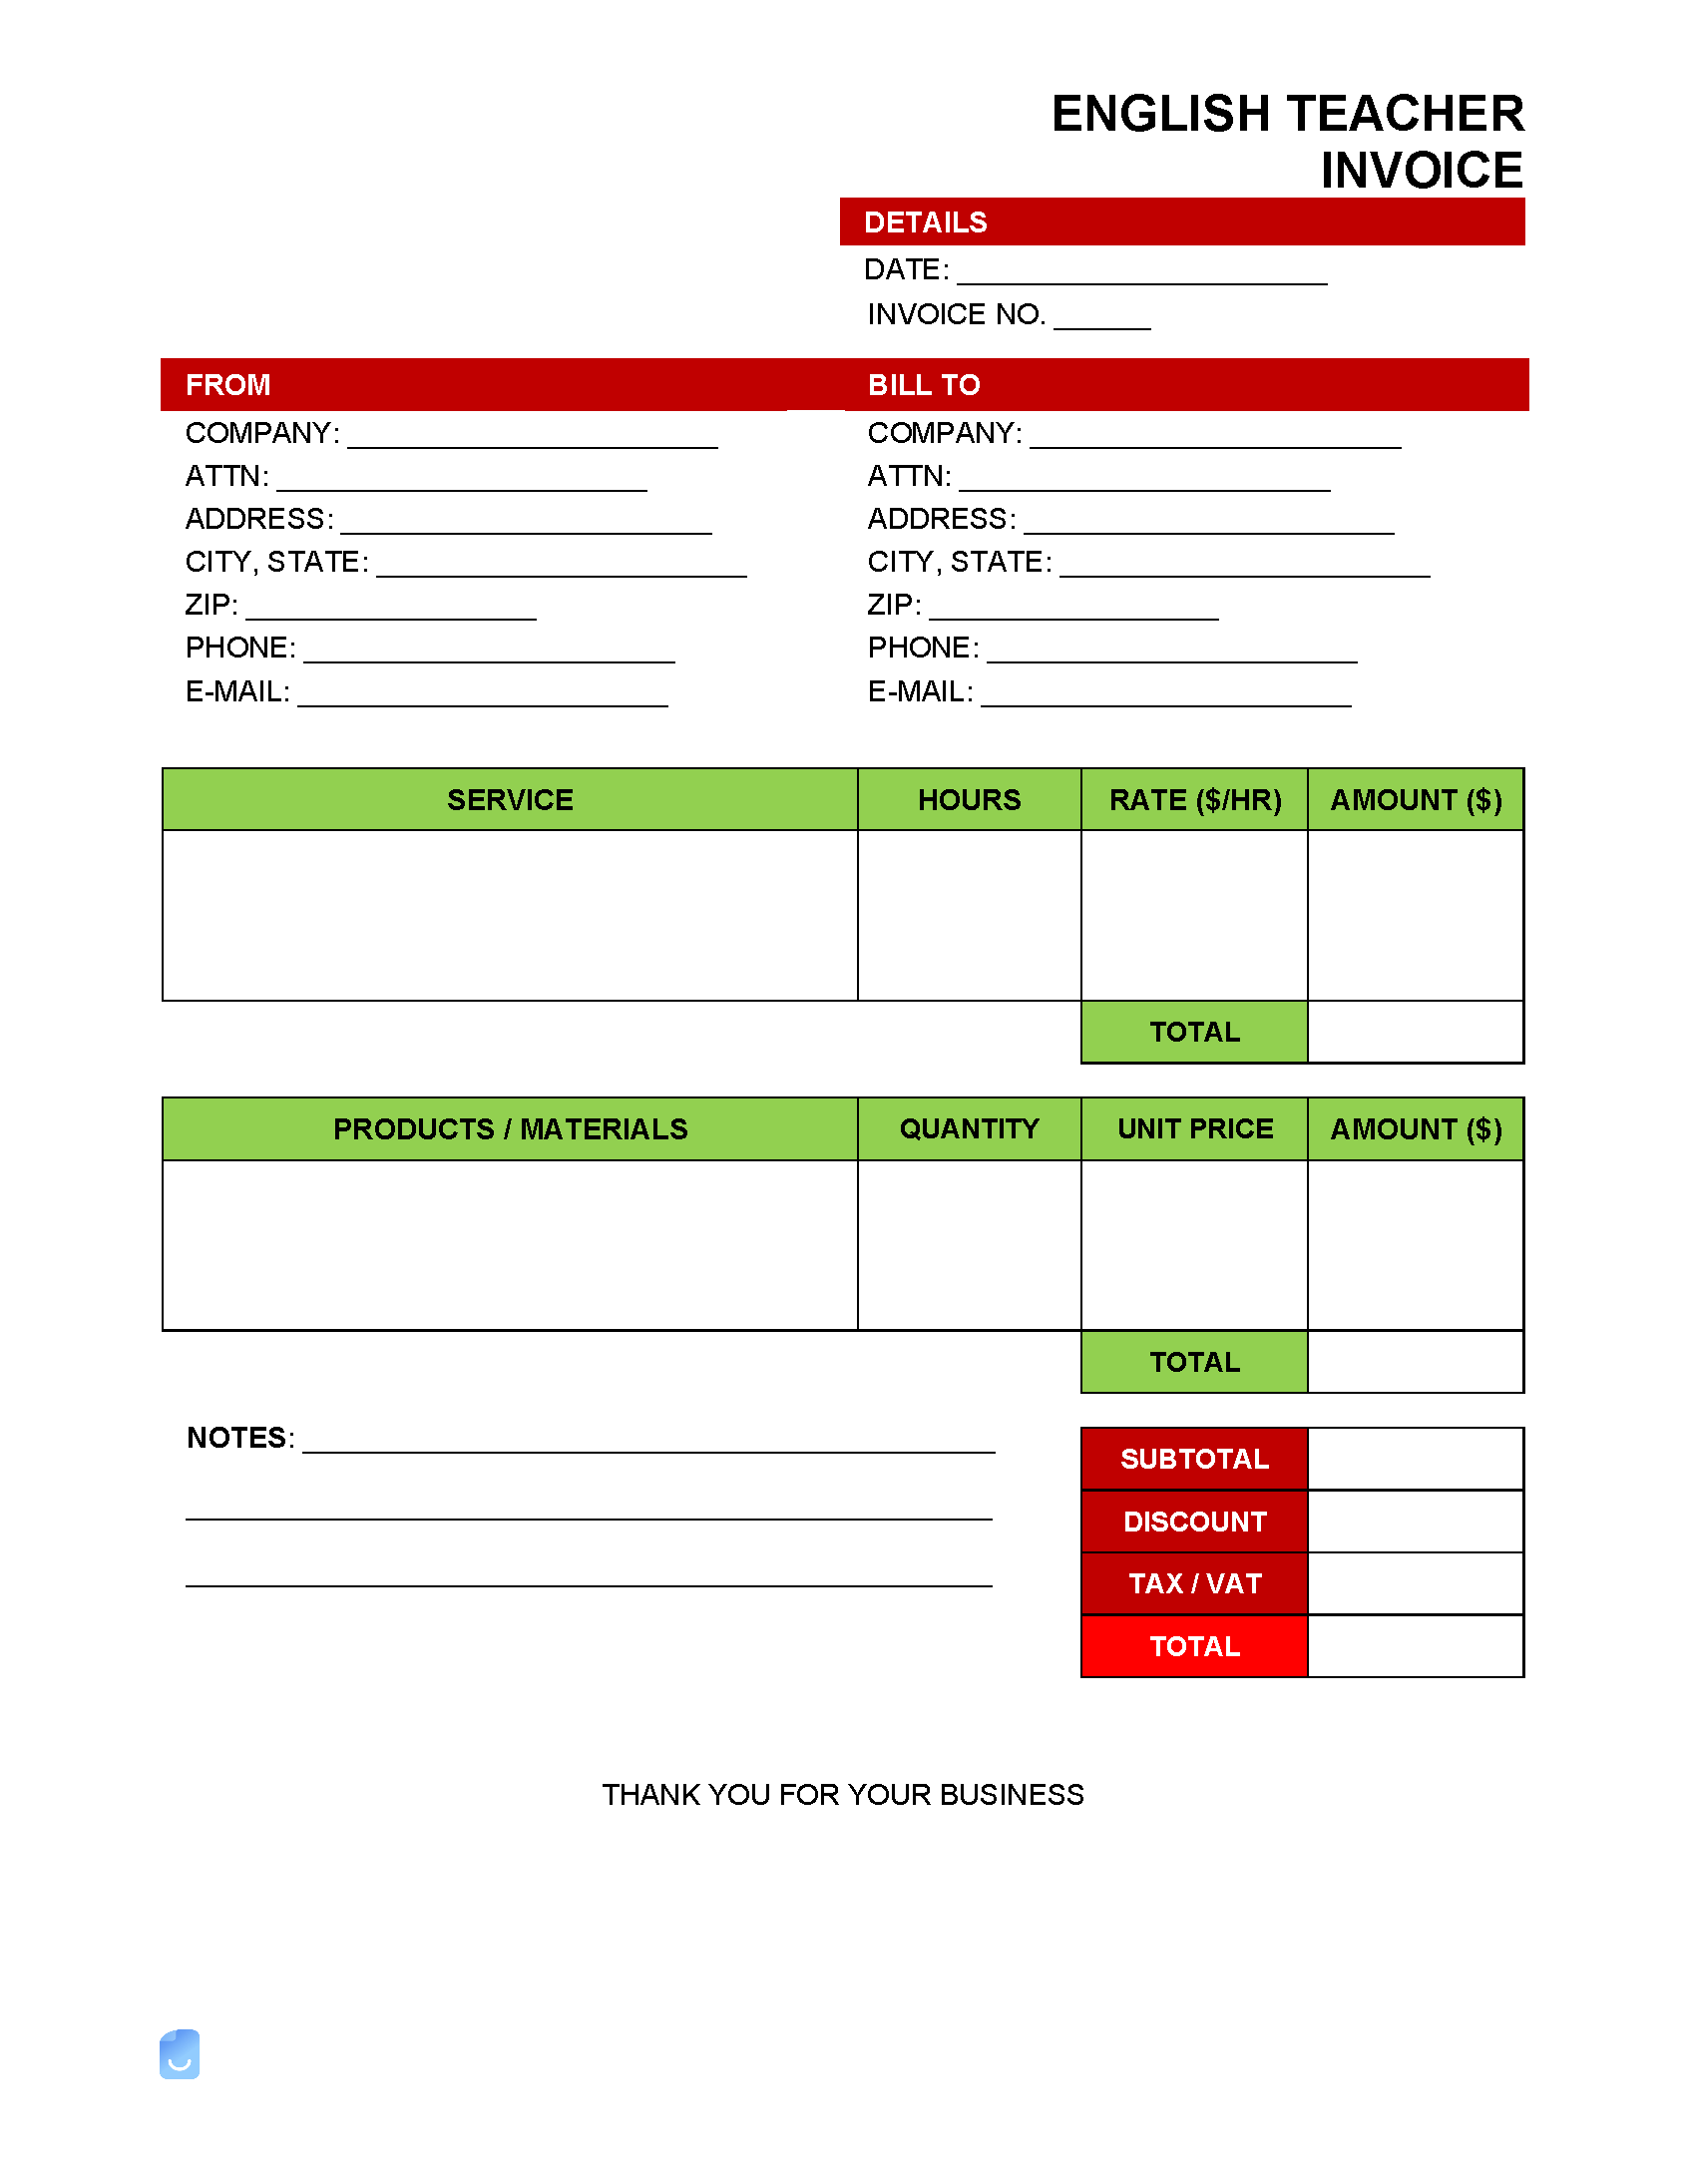 Detail English Invoice Template Nomer 38